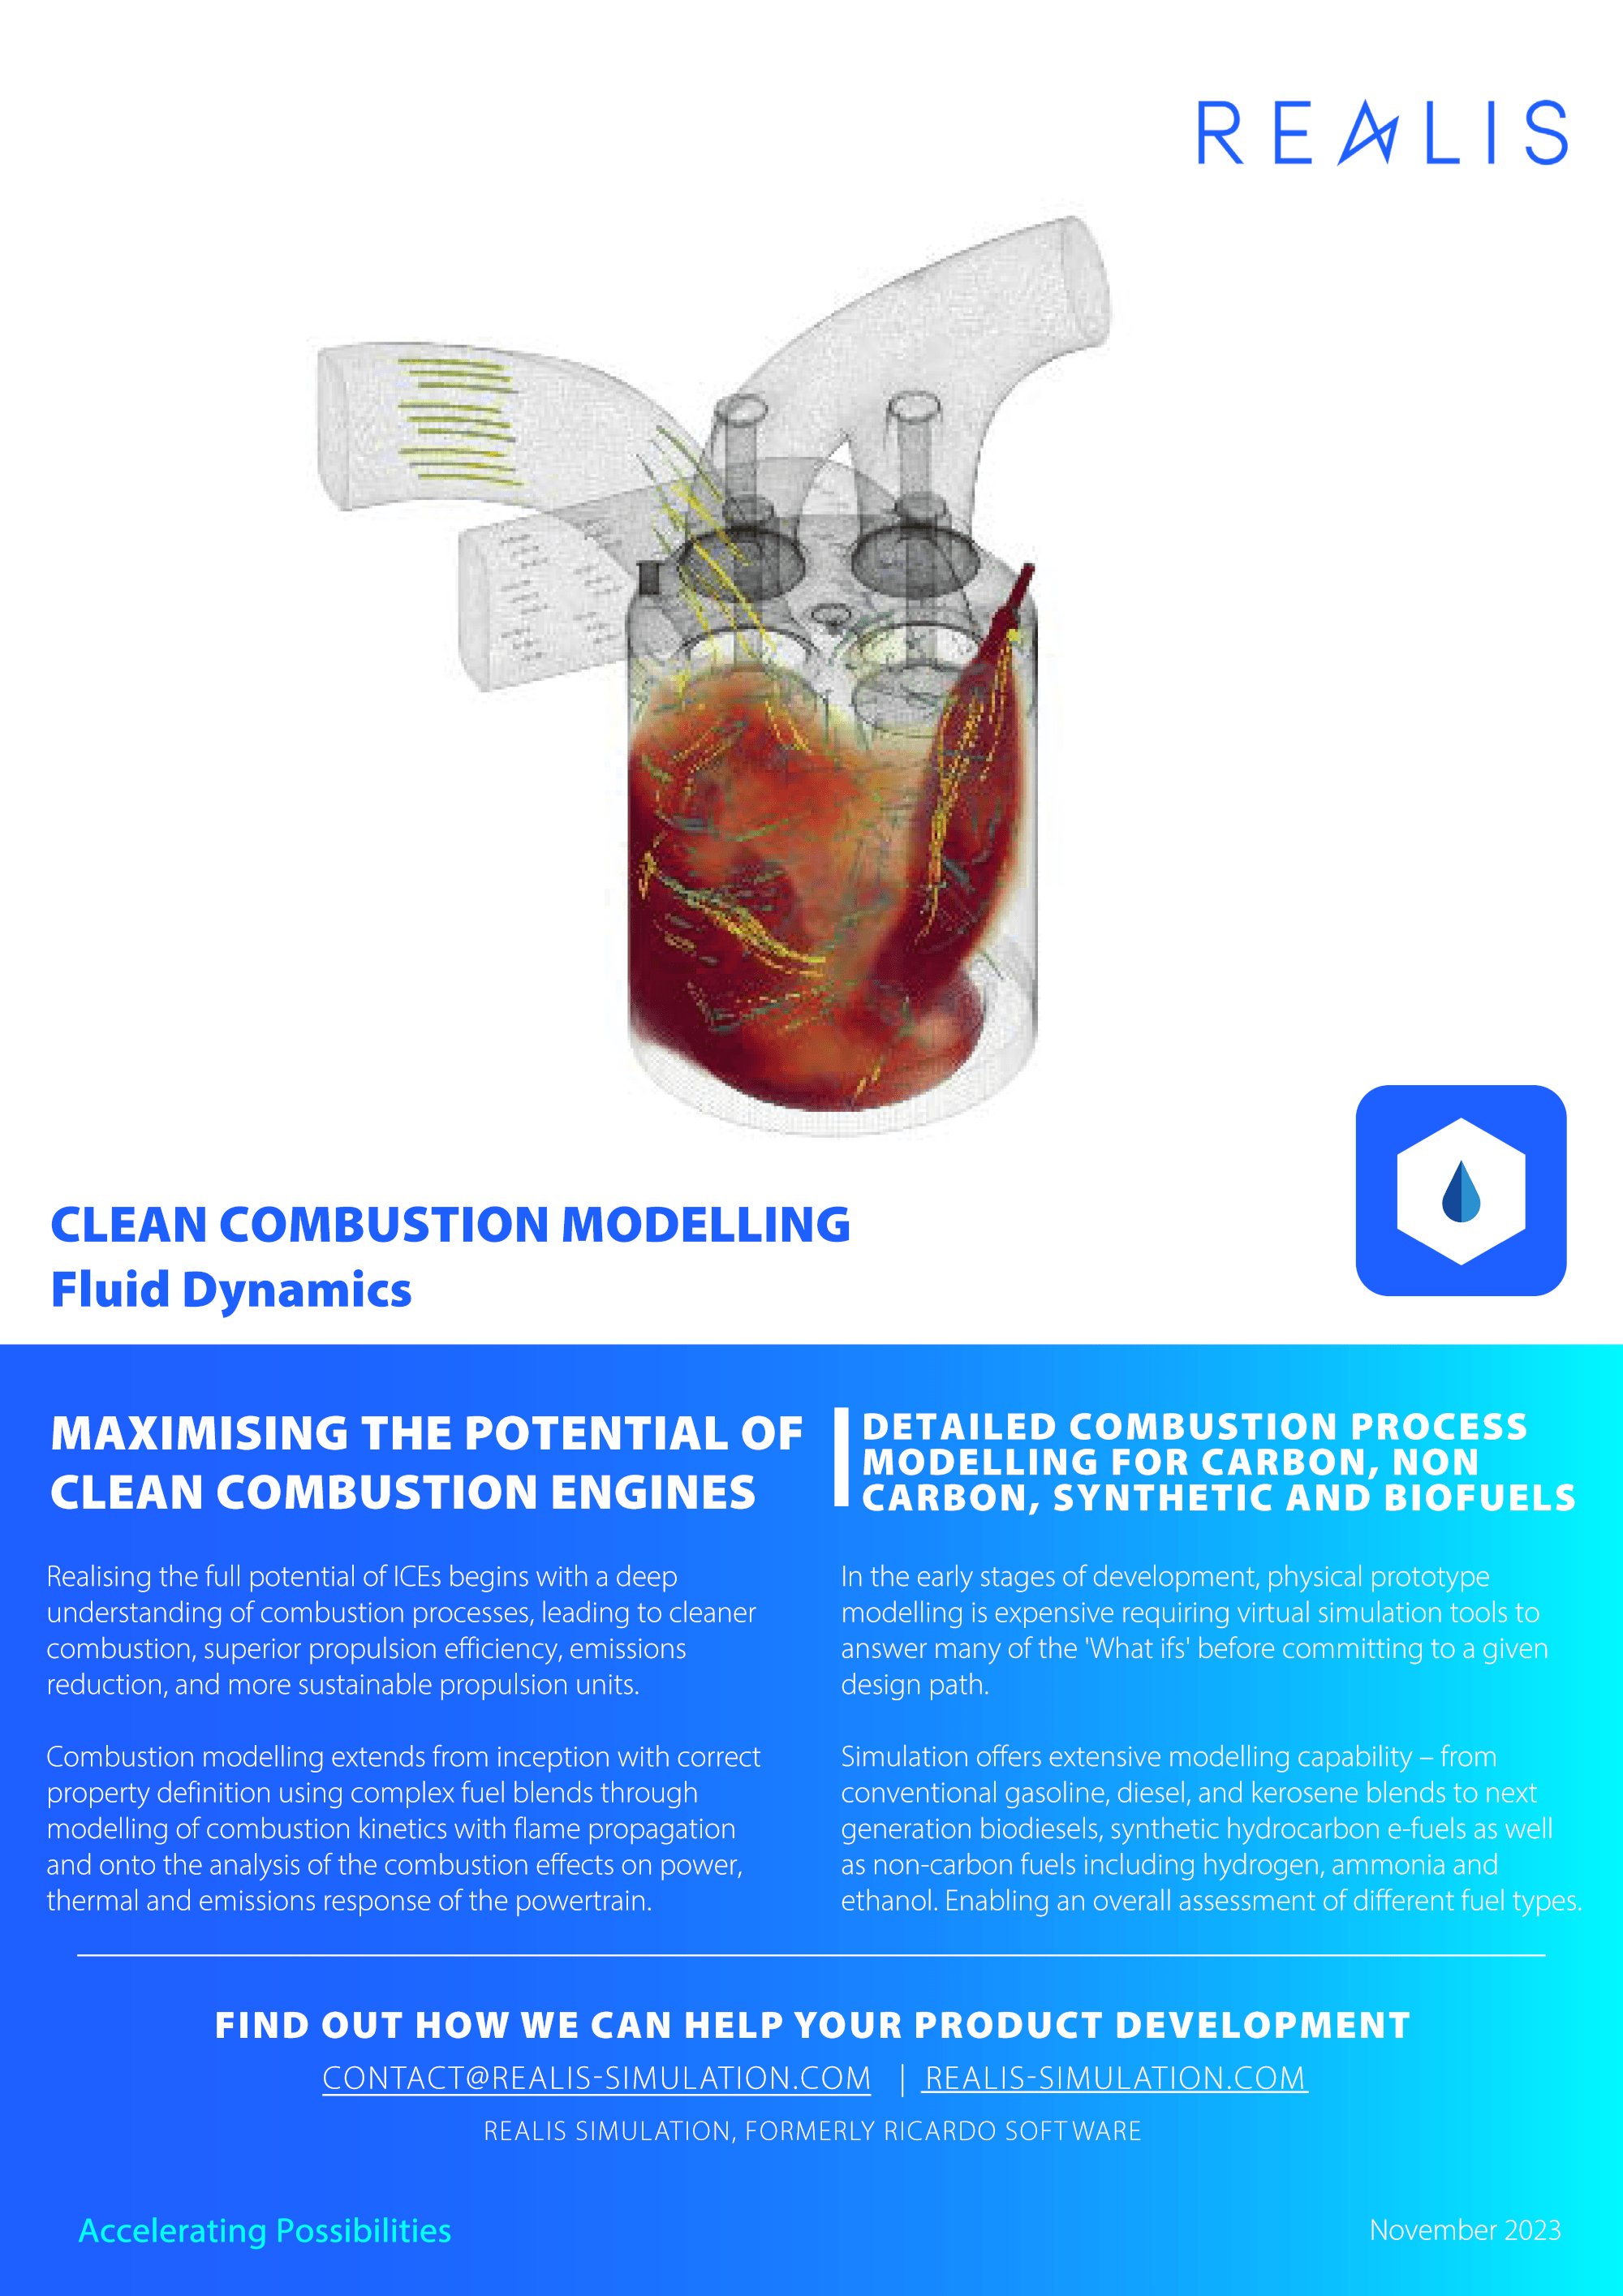 Clean combustion modelling